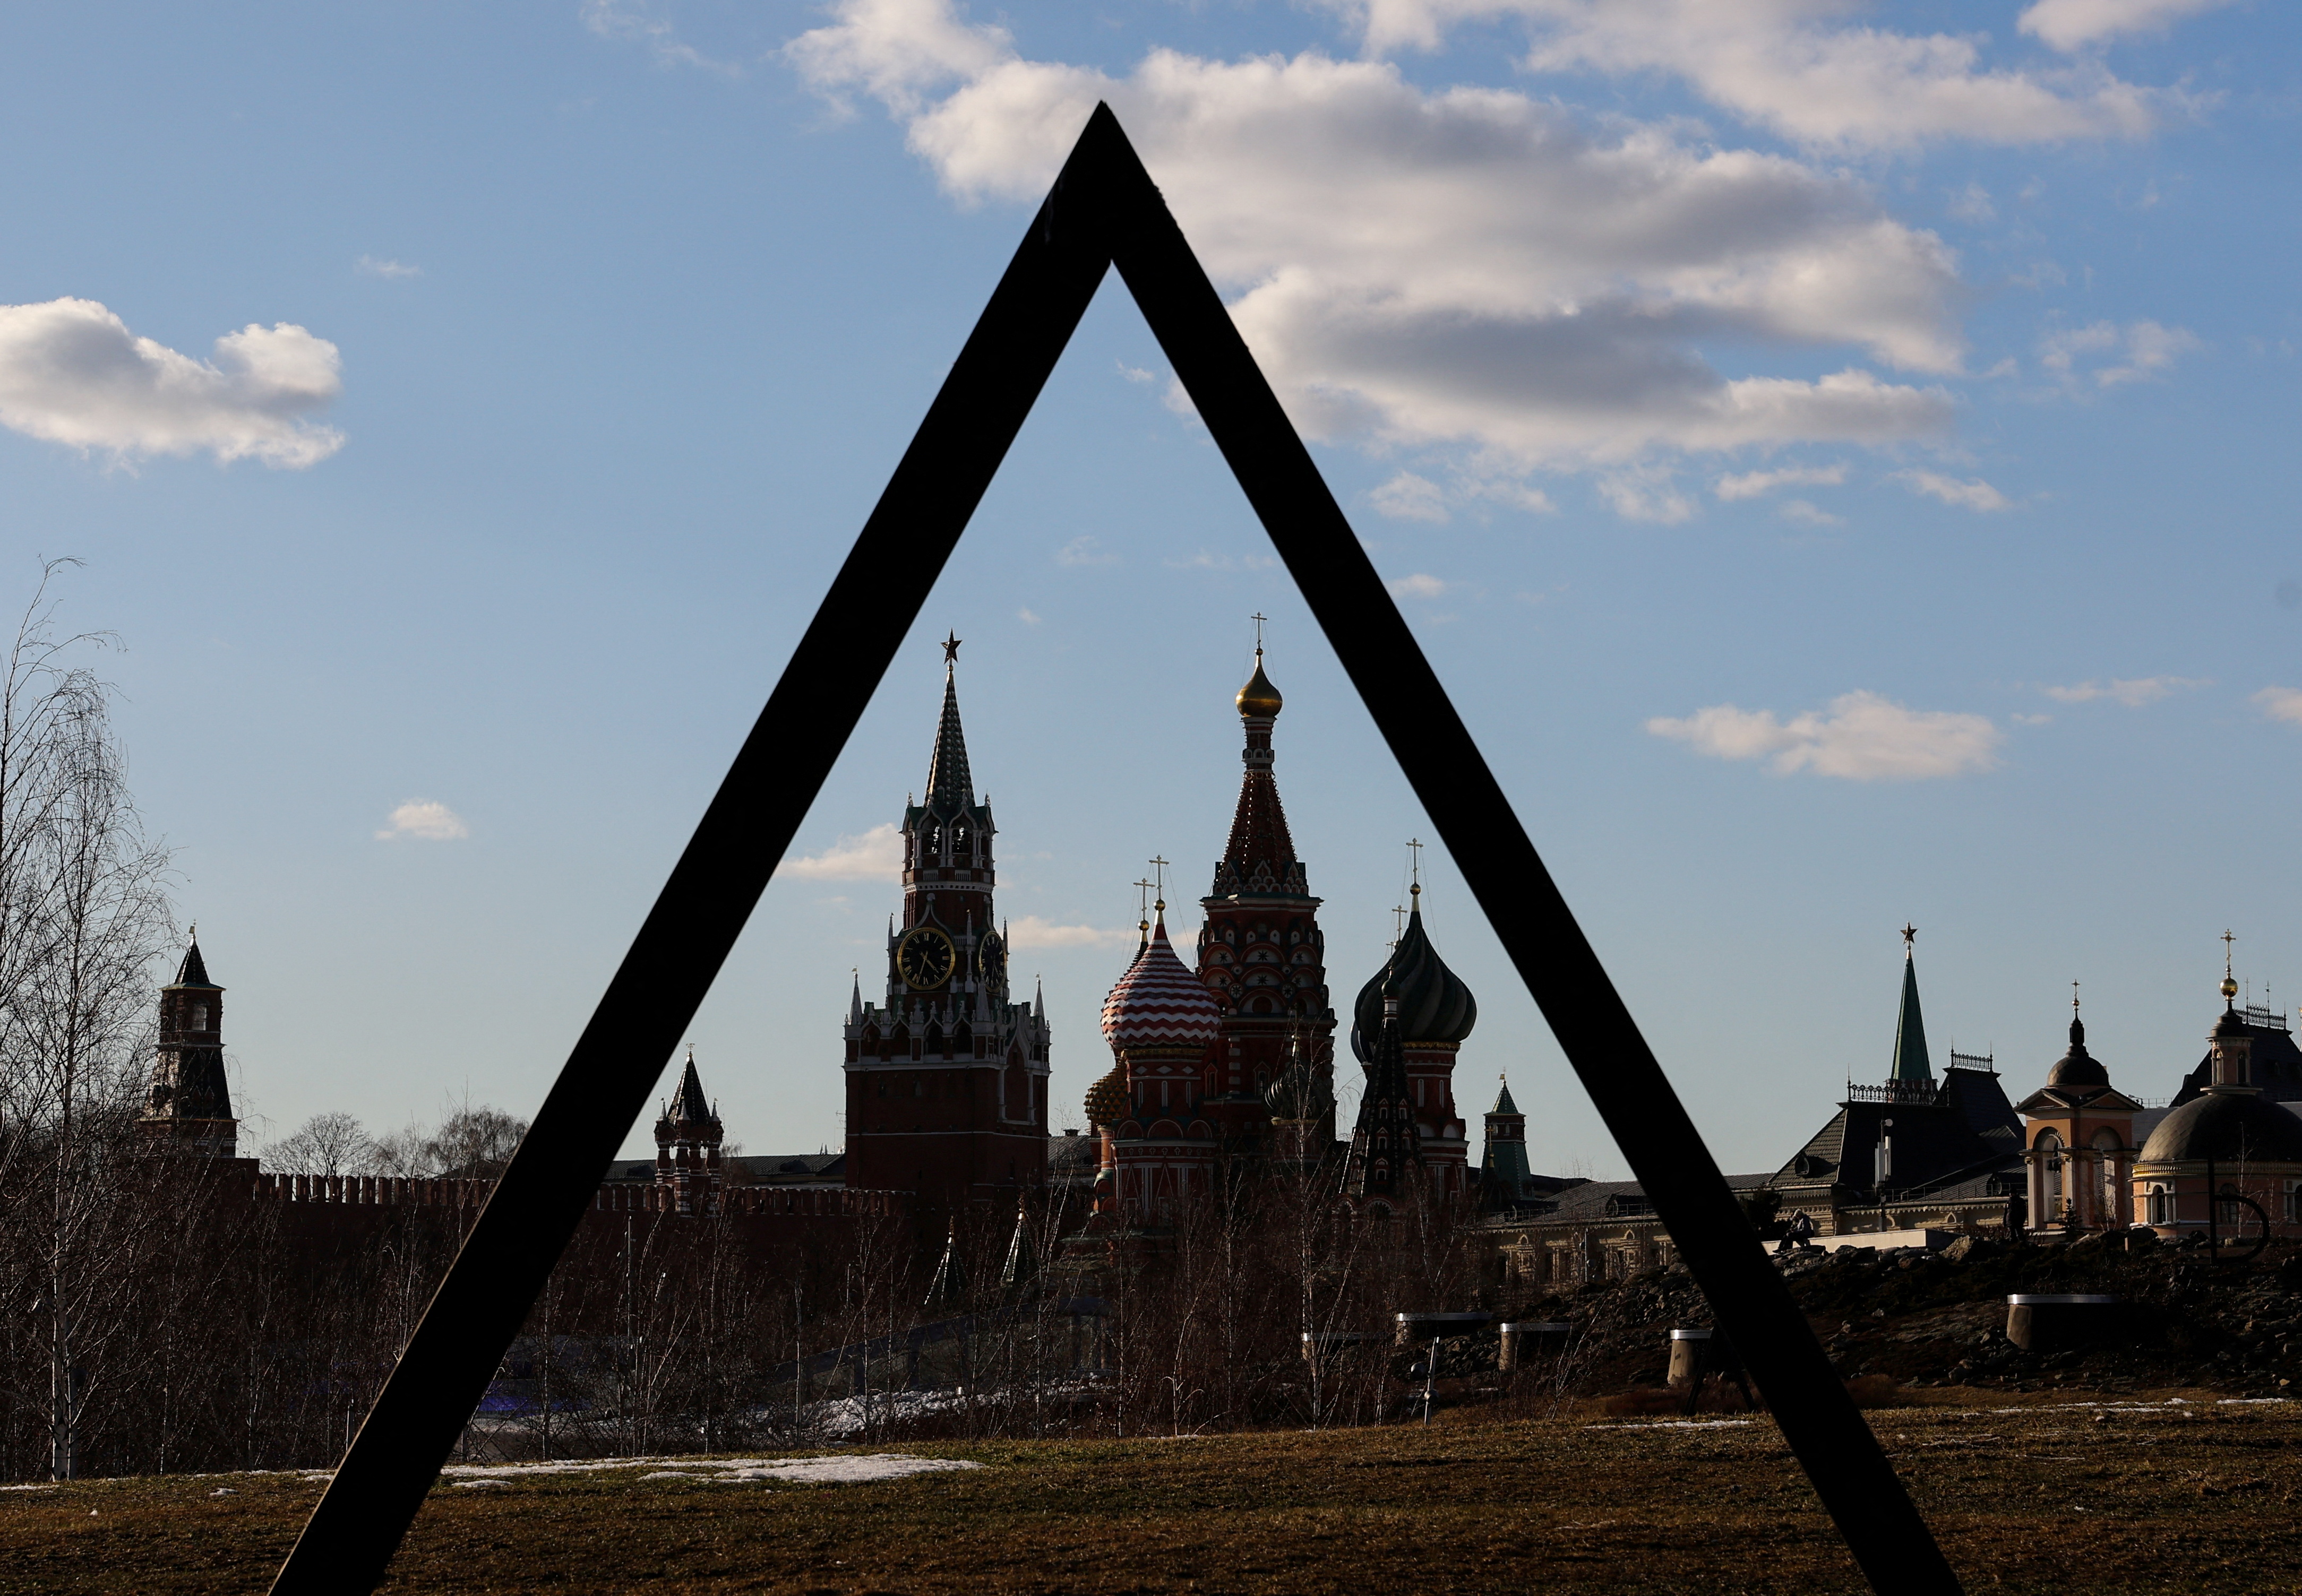 The Kremlin's Spasskaya Tower and St. Basil's Cathedral are seen through the art object in Zaryadye park in Moscow